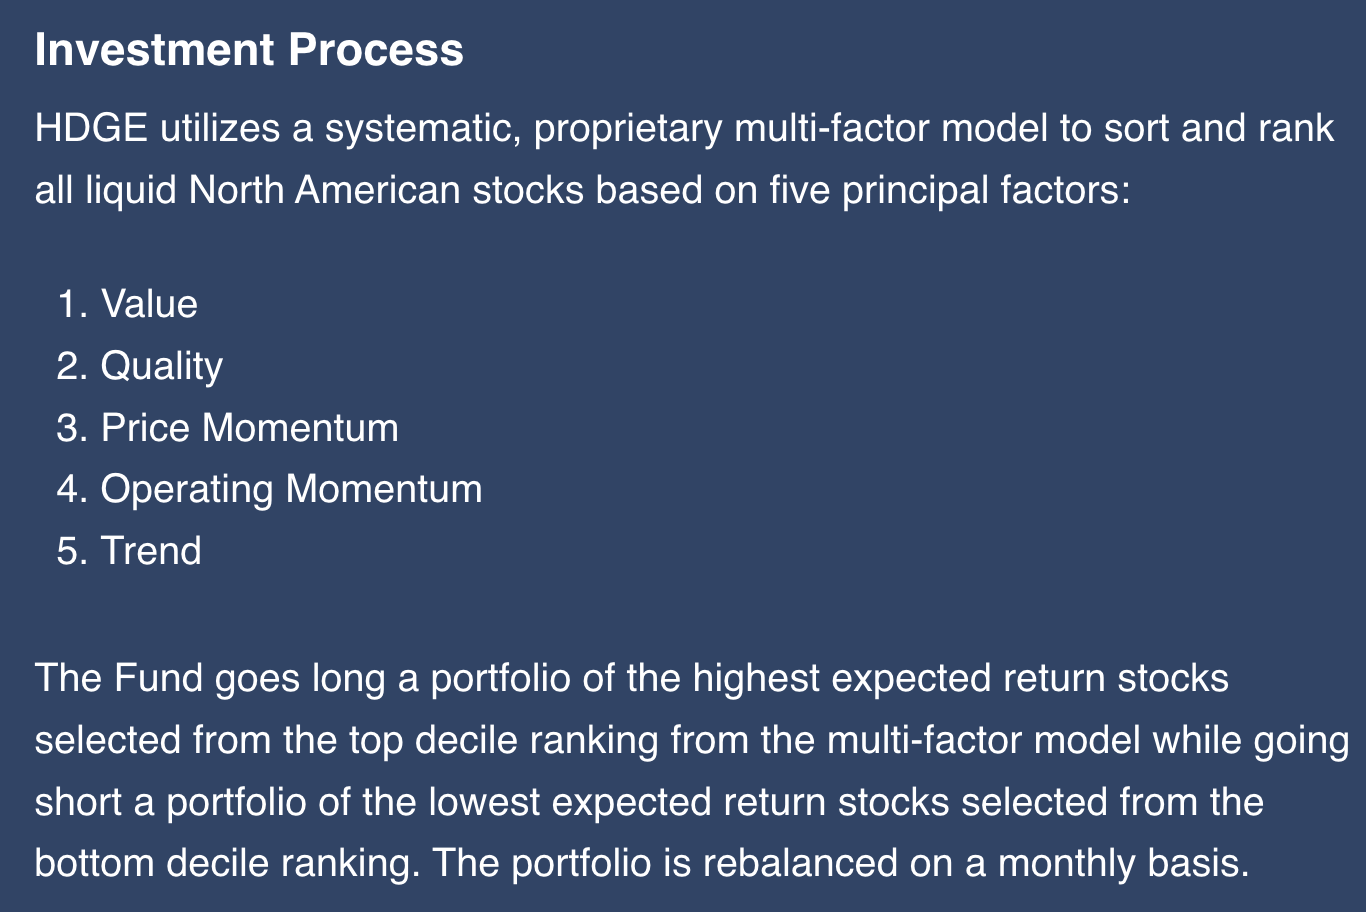 HDGE investment process of selecting stocks based upon value, momentum, quality and trend